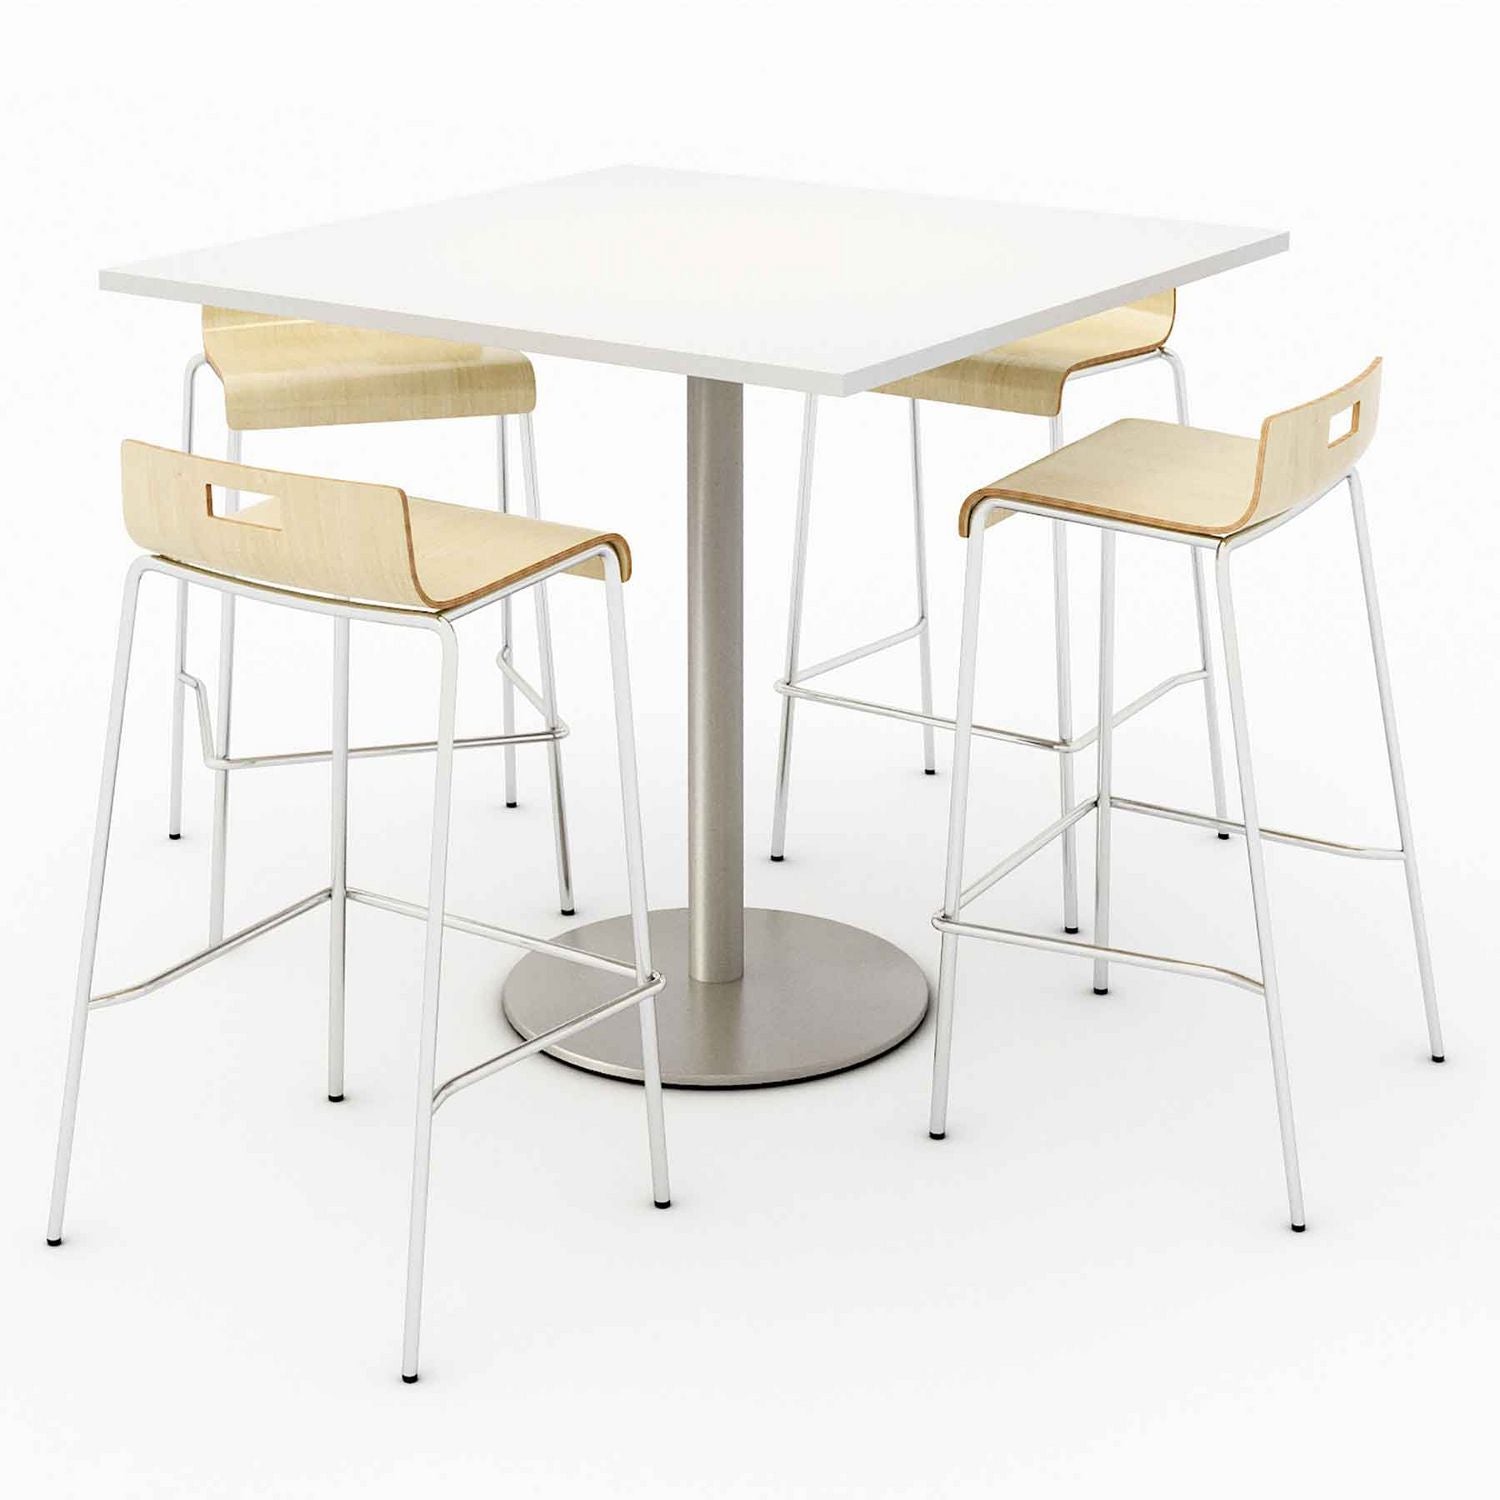 pedestal-bistro-table-with-4-natural-jive-series-barstools-square-36-x-36-x-41-designer-white-ships-in-4-6-business-days_kfi811774039895 - 1